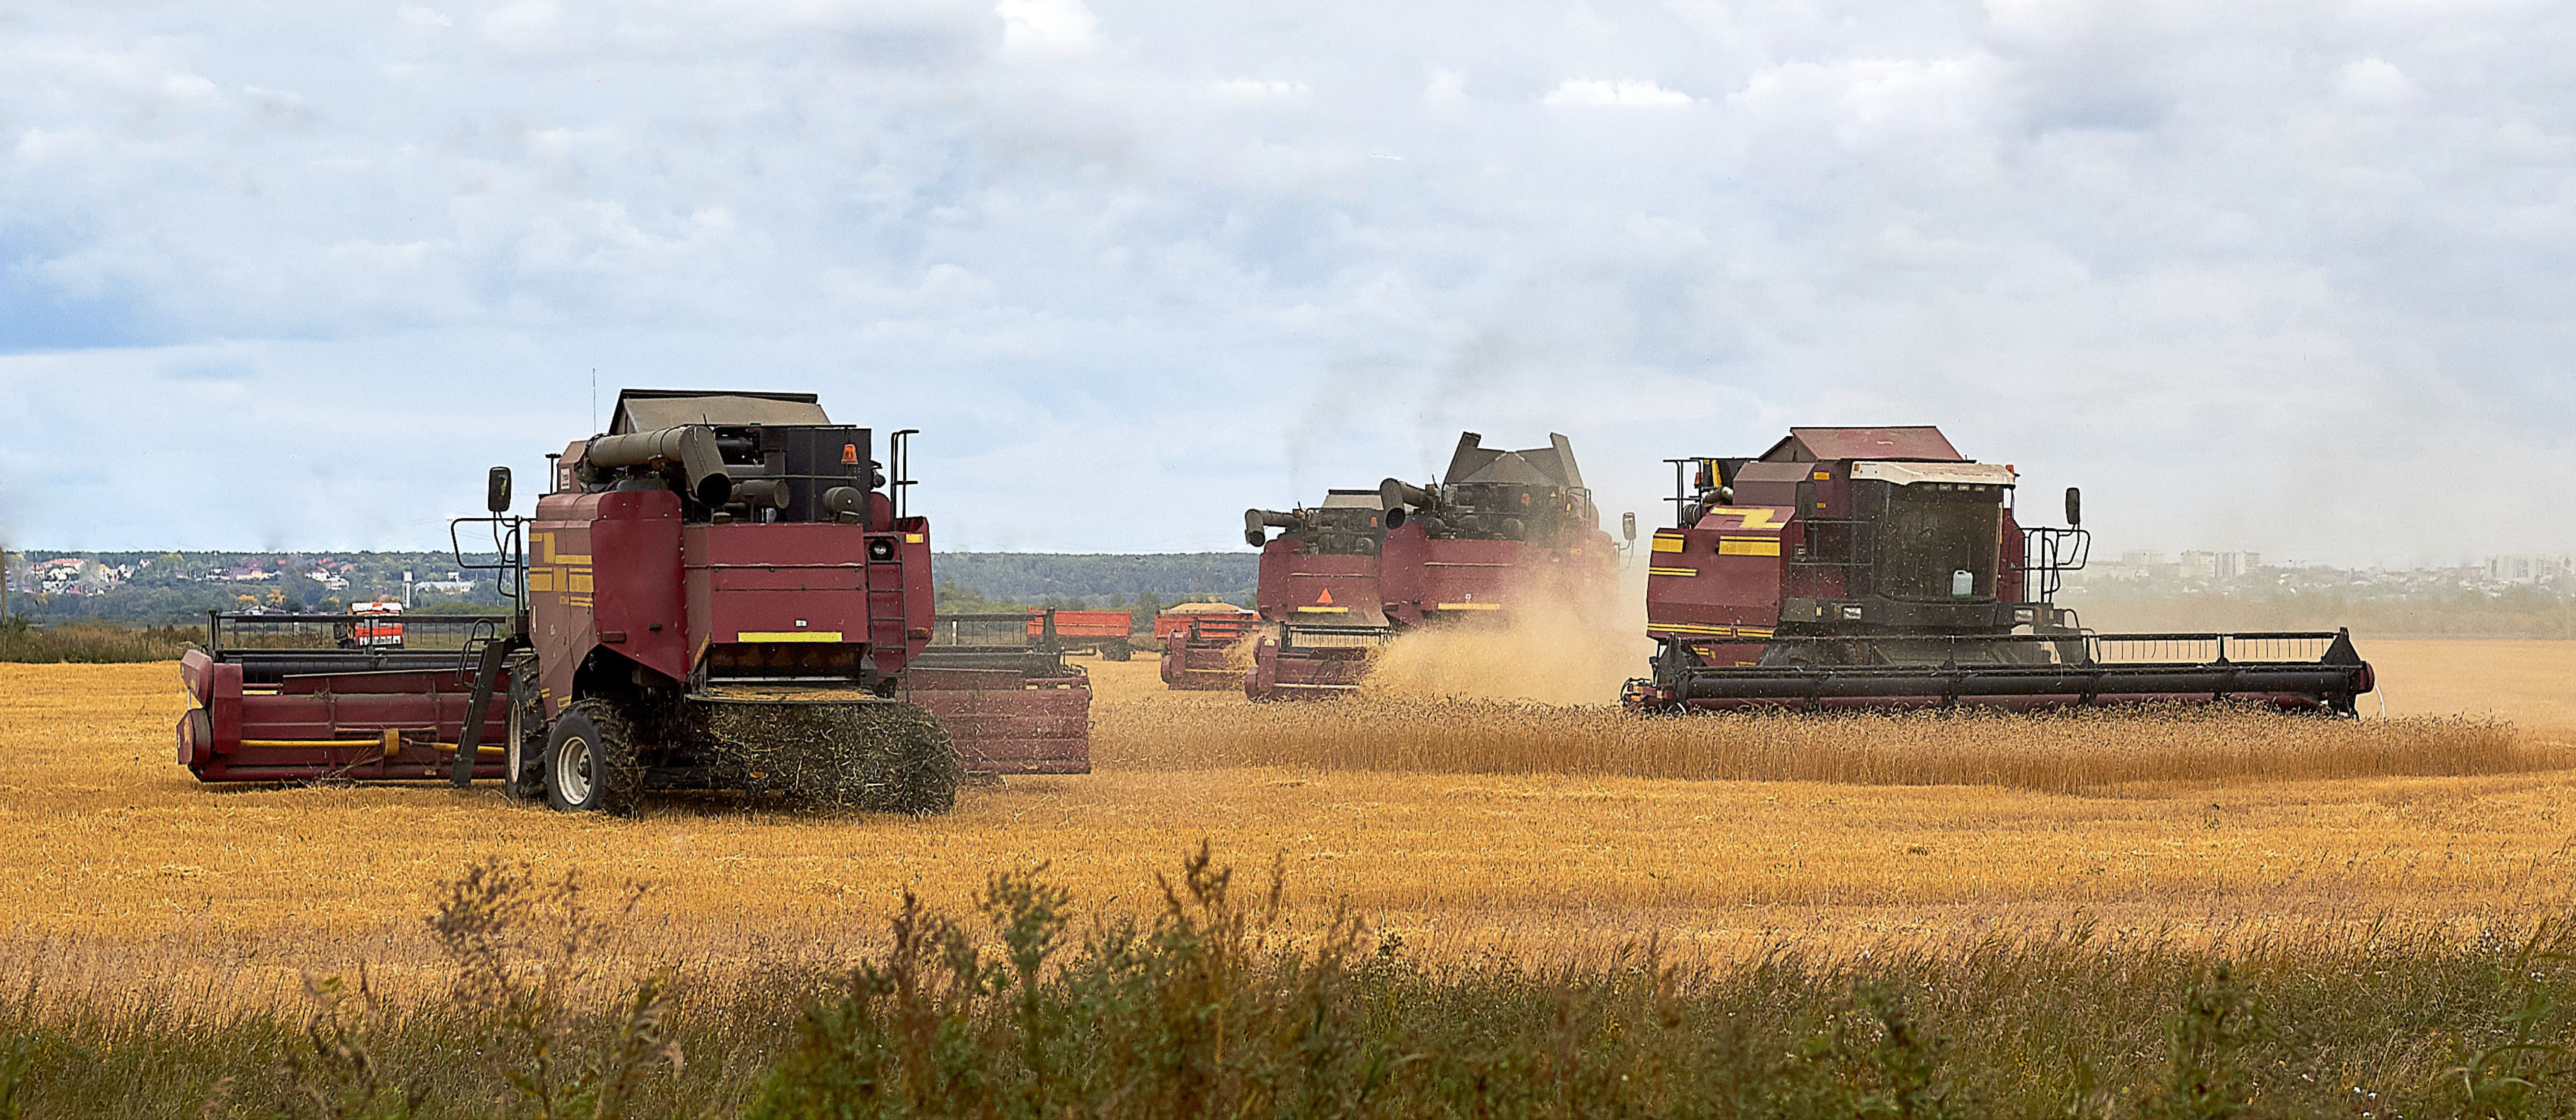 Field being harvested